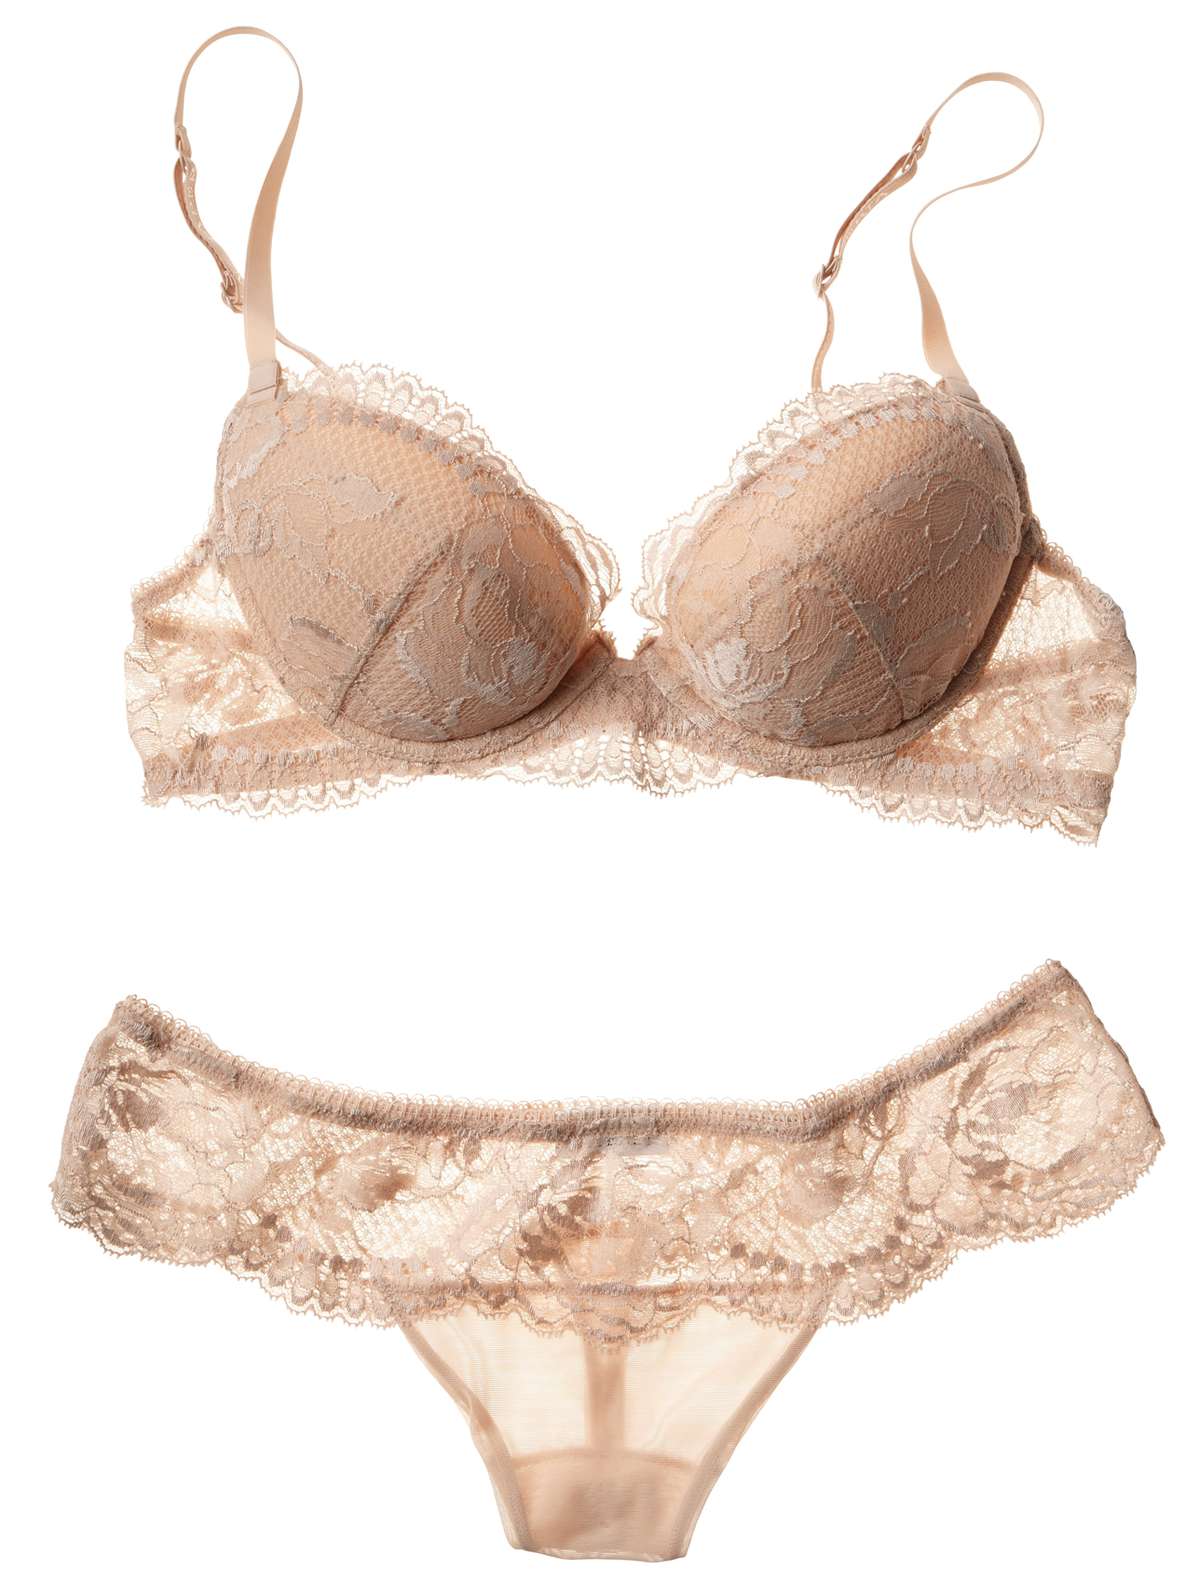 I Resolve to: Buy Beautiful Grown-Up Lingerie